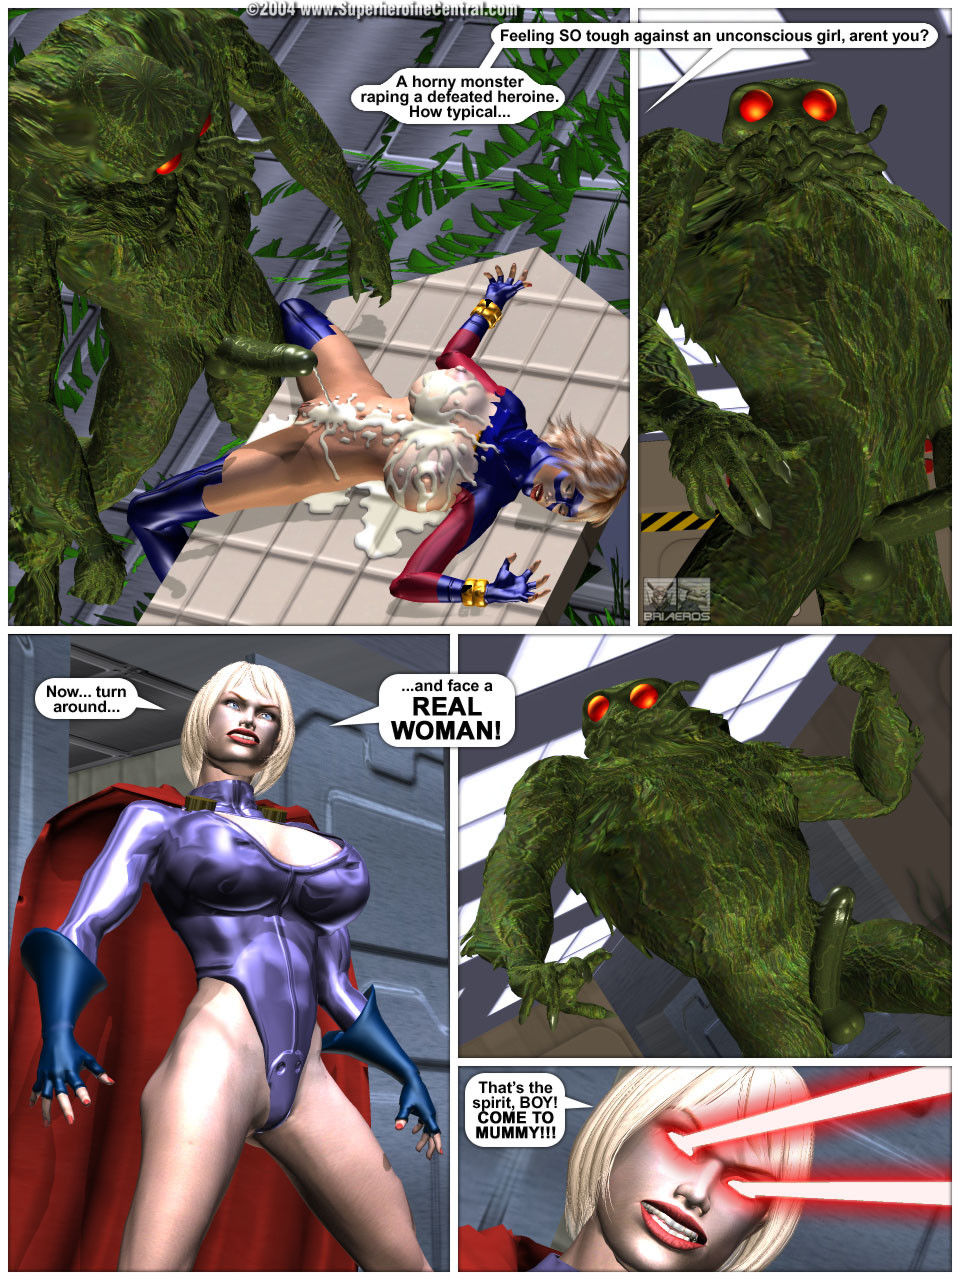 Tall To Arouse - Inside a Green Hell - Superheroinecentral page 32